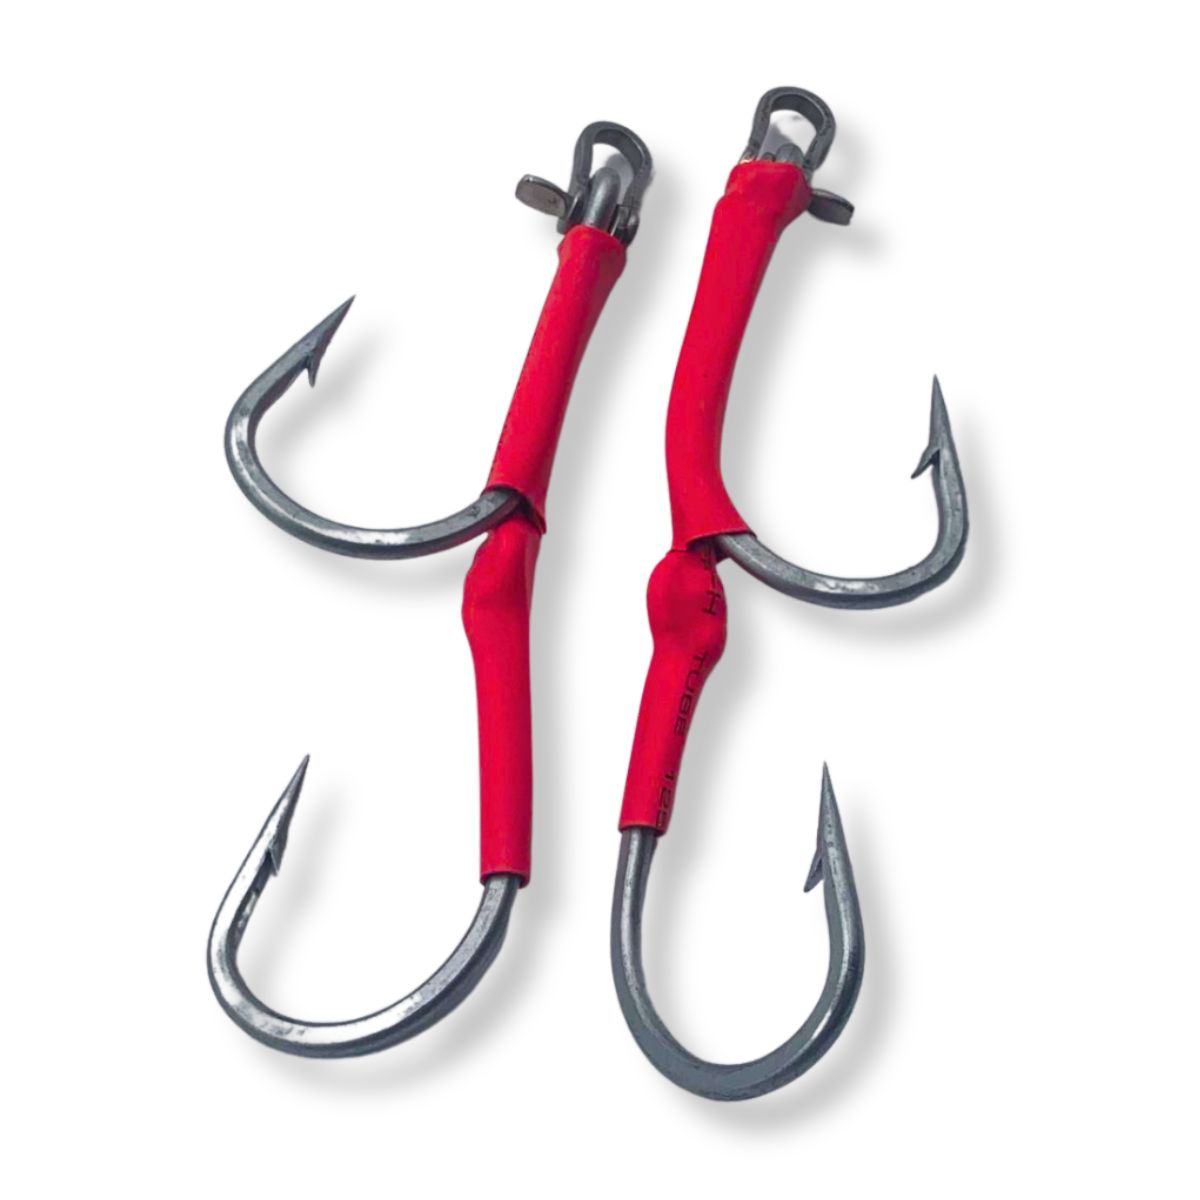 Kamikaze - 2 Game Lure Assist Hook 9/0 - D-Shackle Rigs Twin Pack - South East Clearance Centre